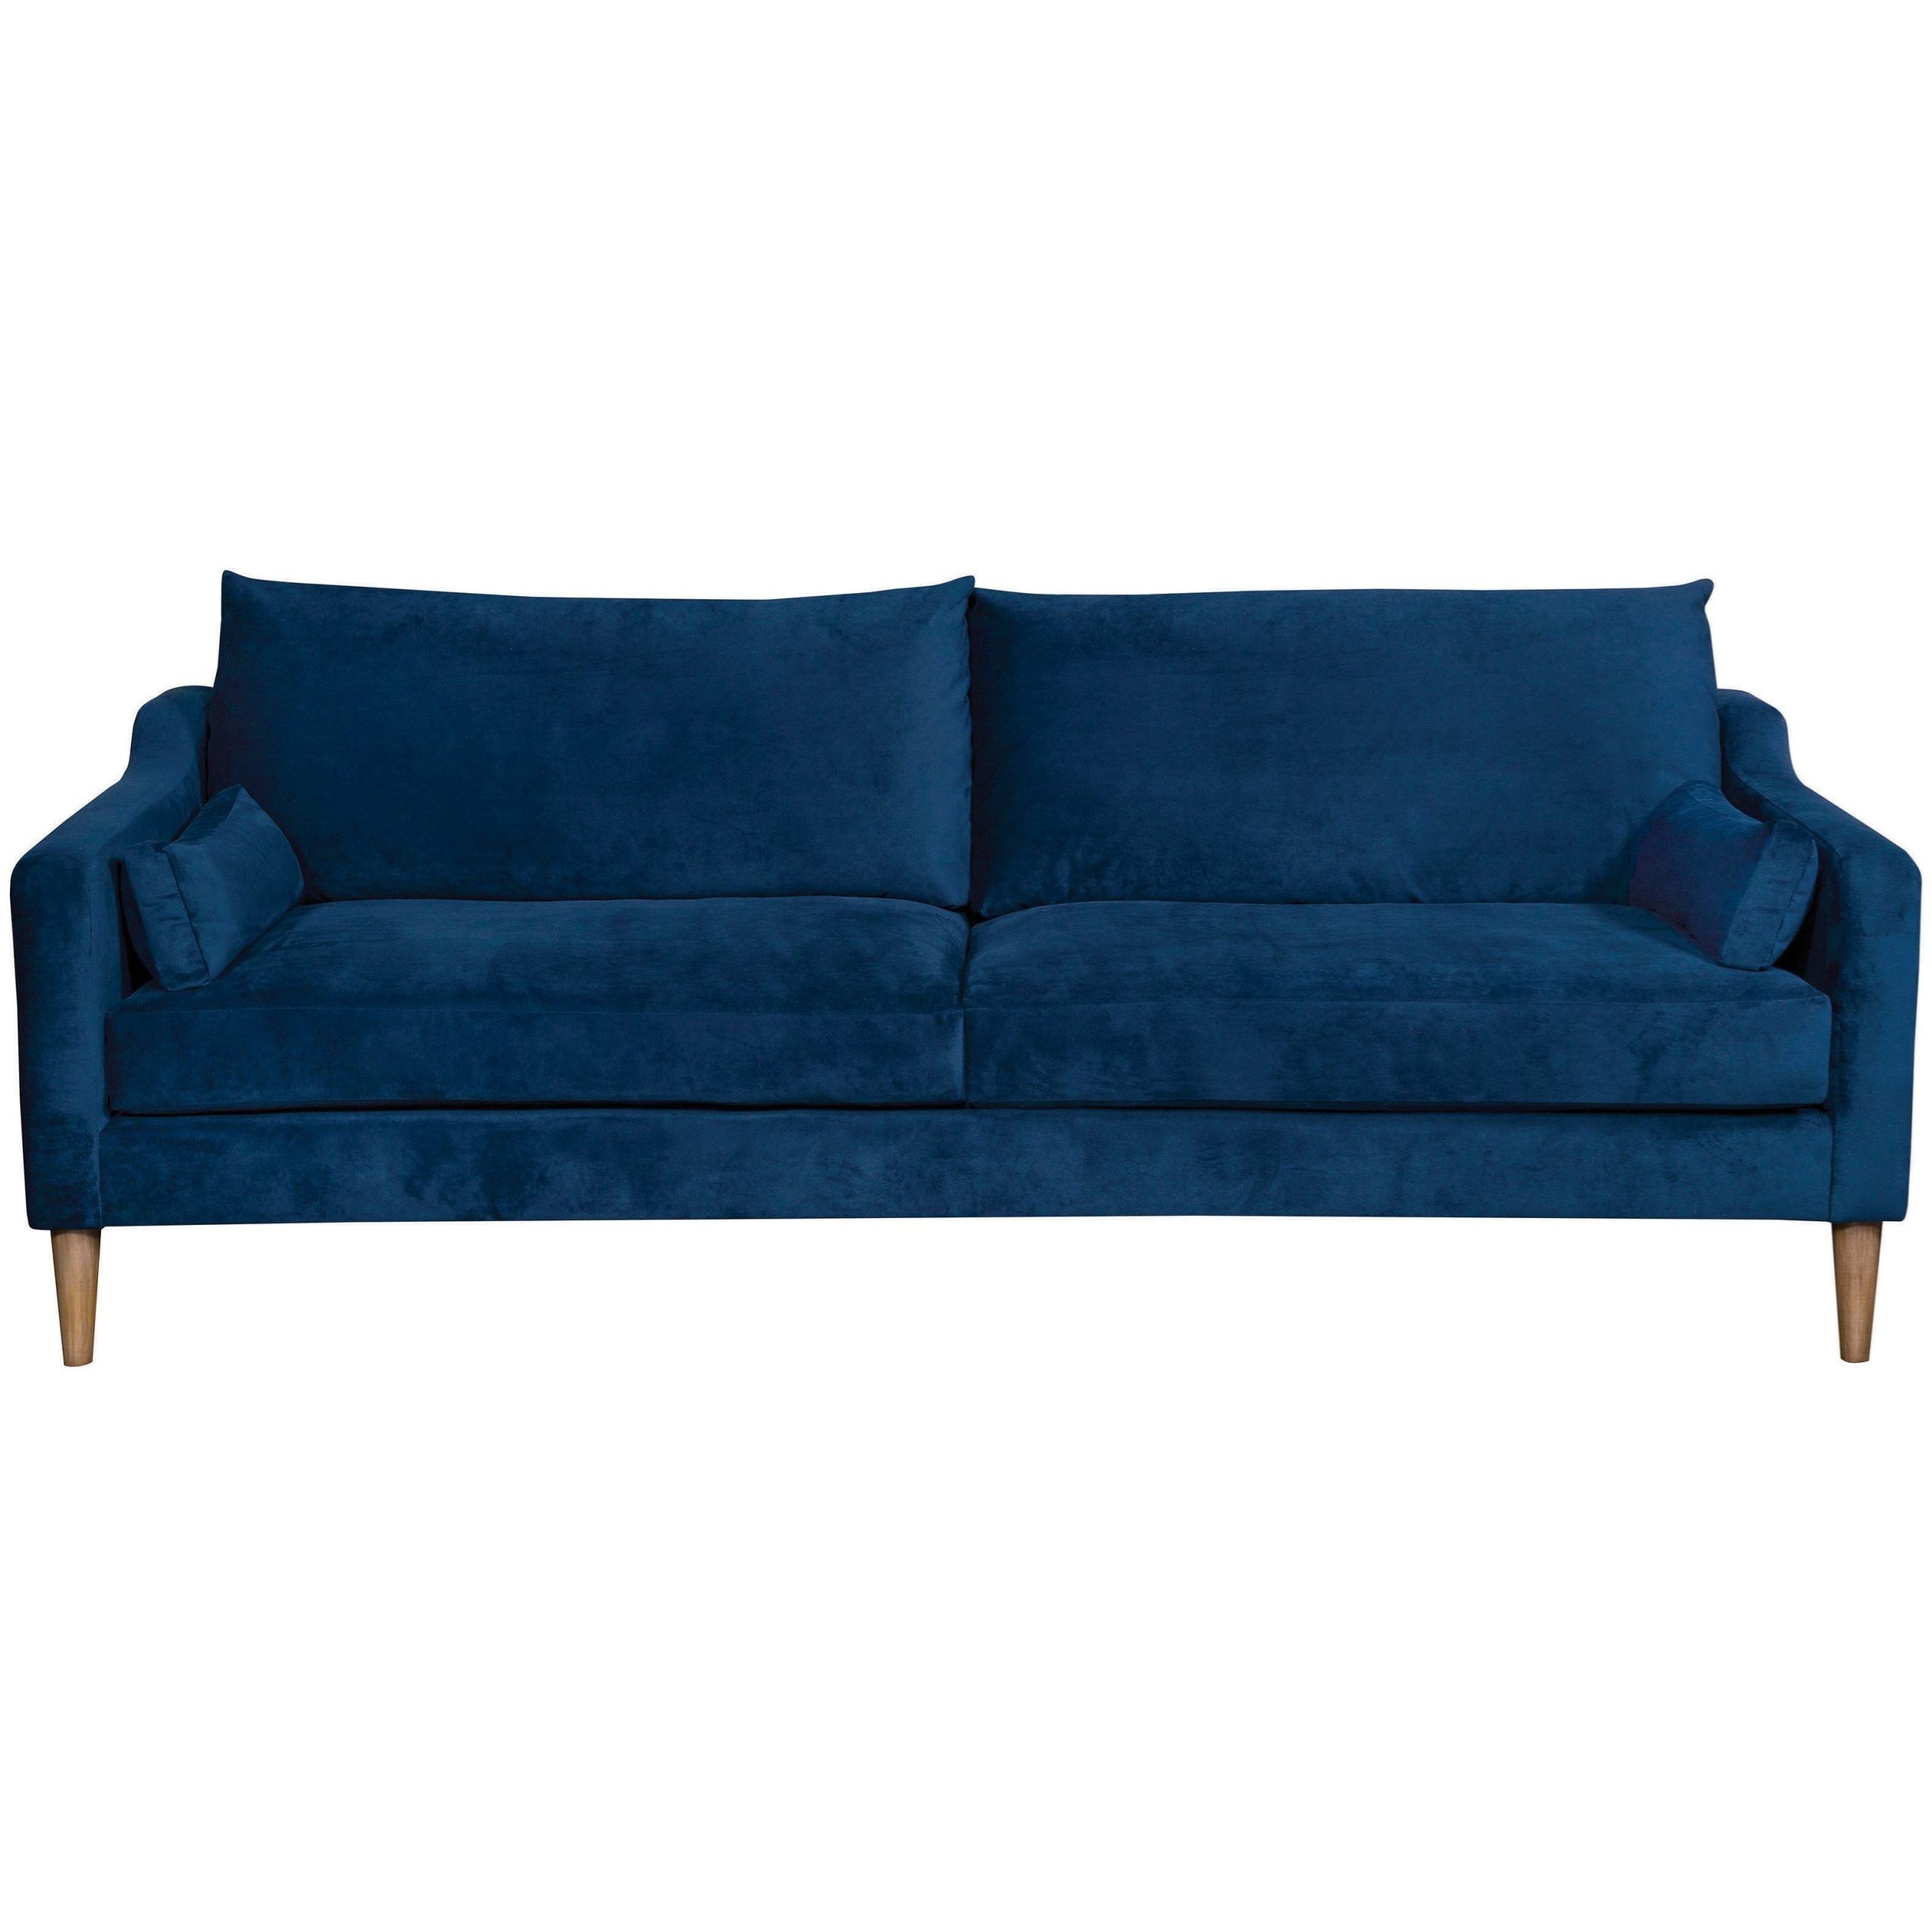 Vanguard Furniture Thea – Ease Upholstery Contemporary Two Seat Sofa With Black Velvet 2 Seater Sofa Beds (View 19 of 20)